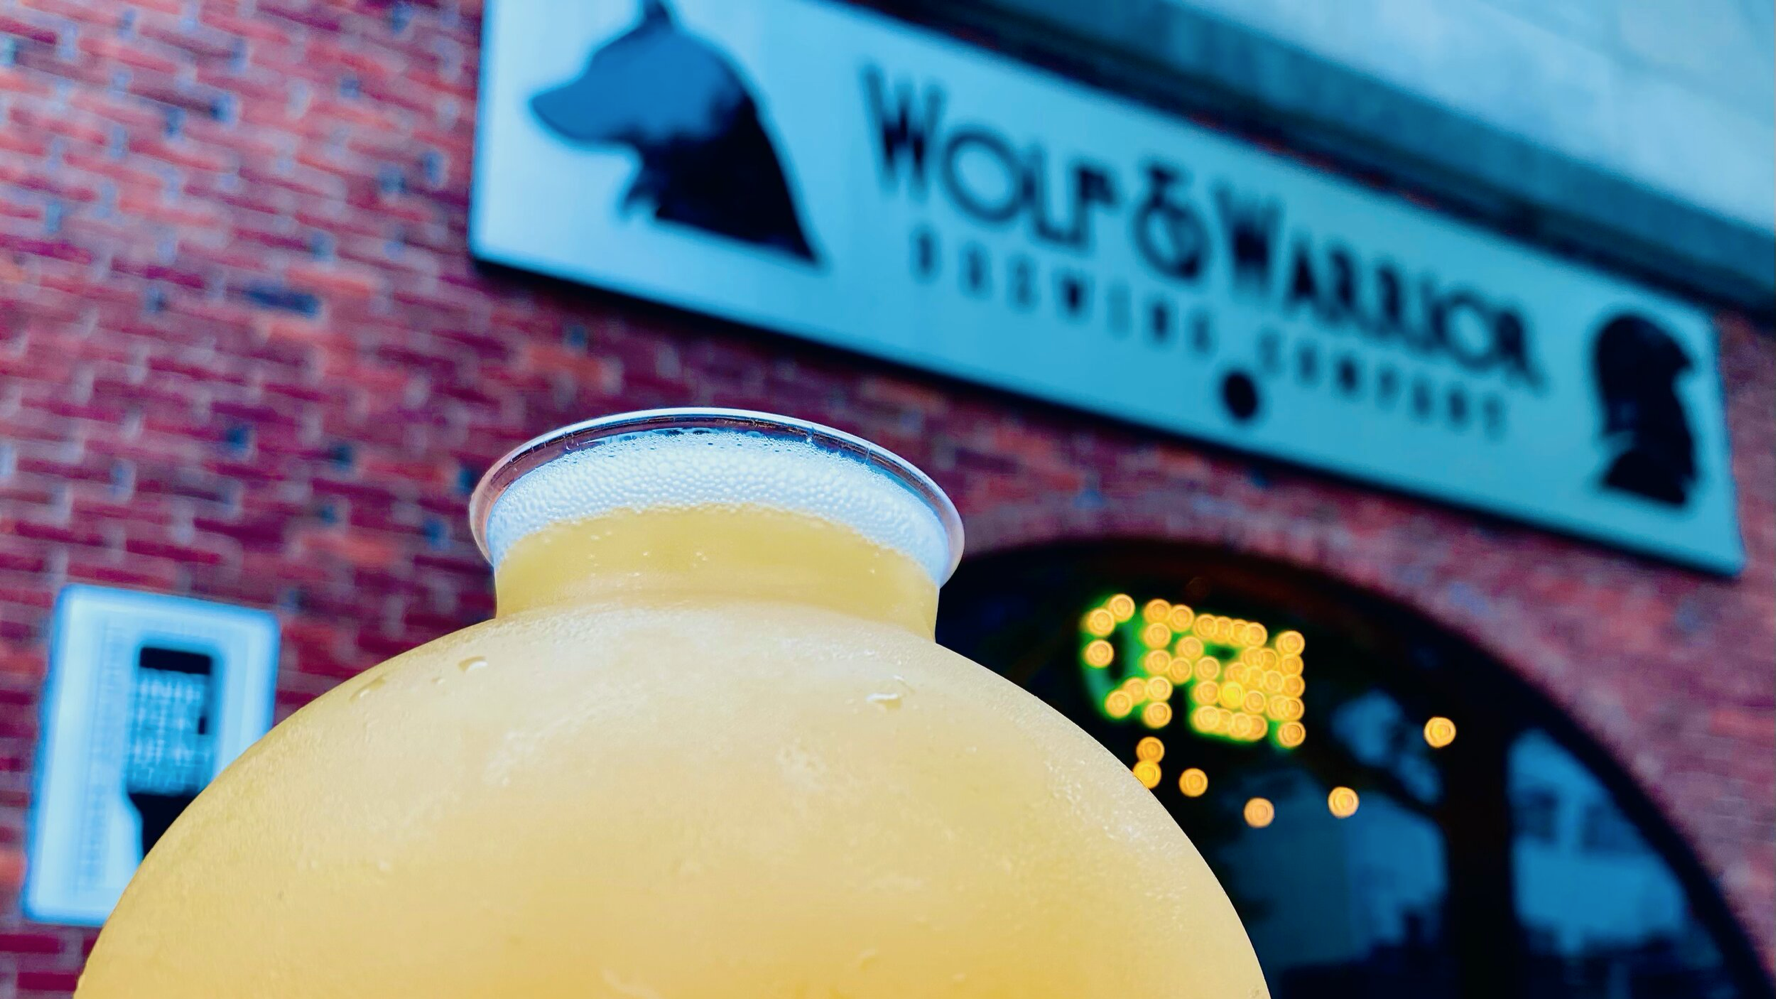 January 24: RPAC Happy Hour at Wolf & Warrior Brewery